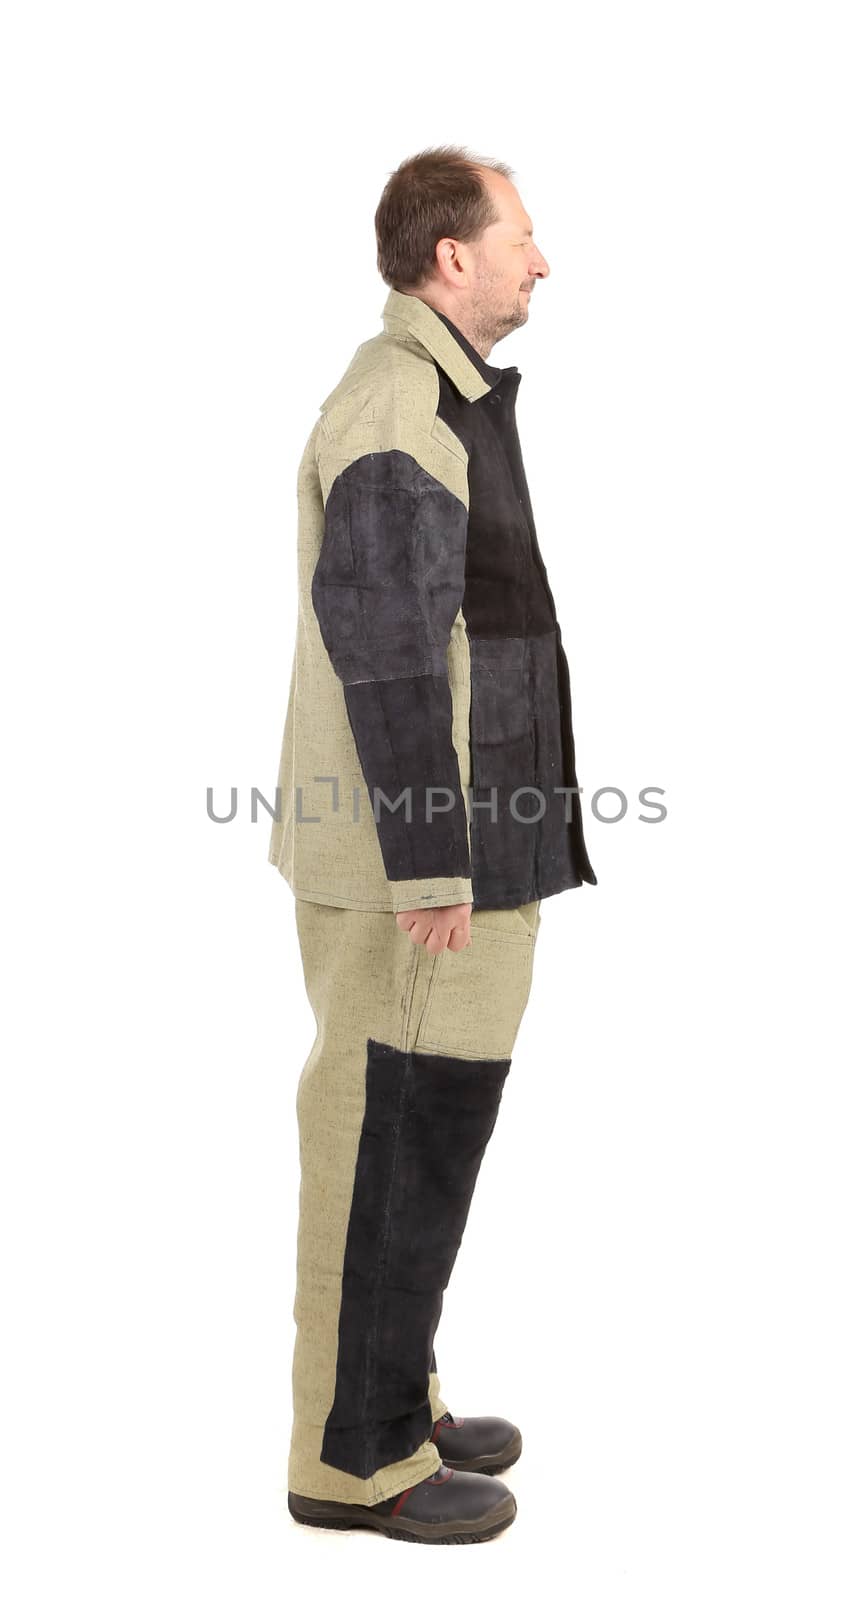 Welder in workwear suit. Side view. Isolated on a white background.